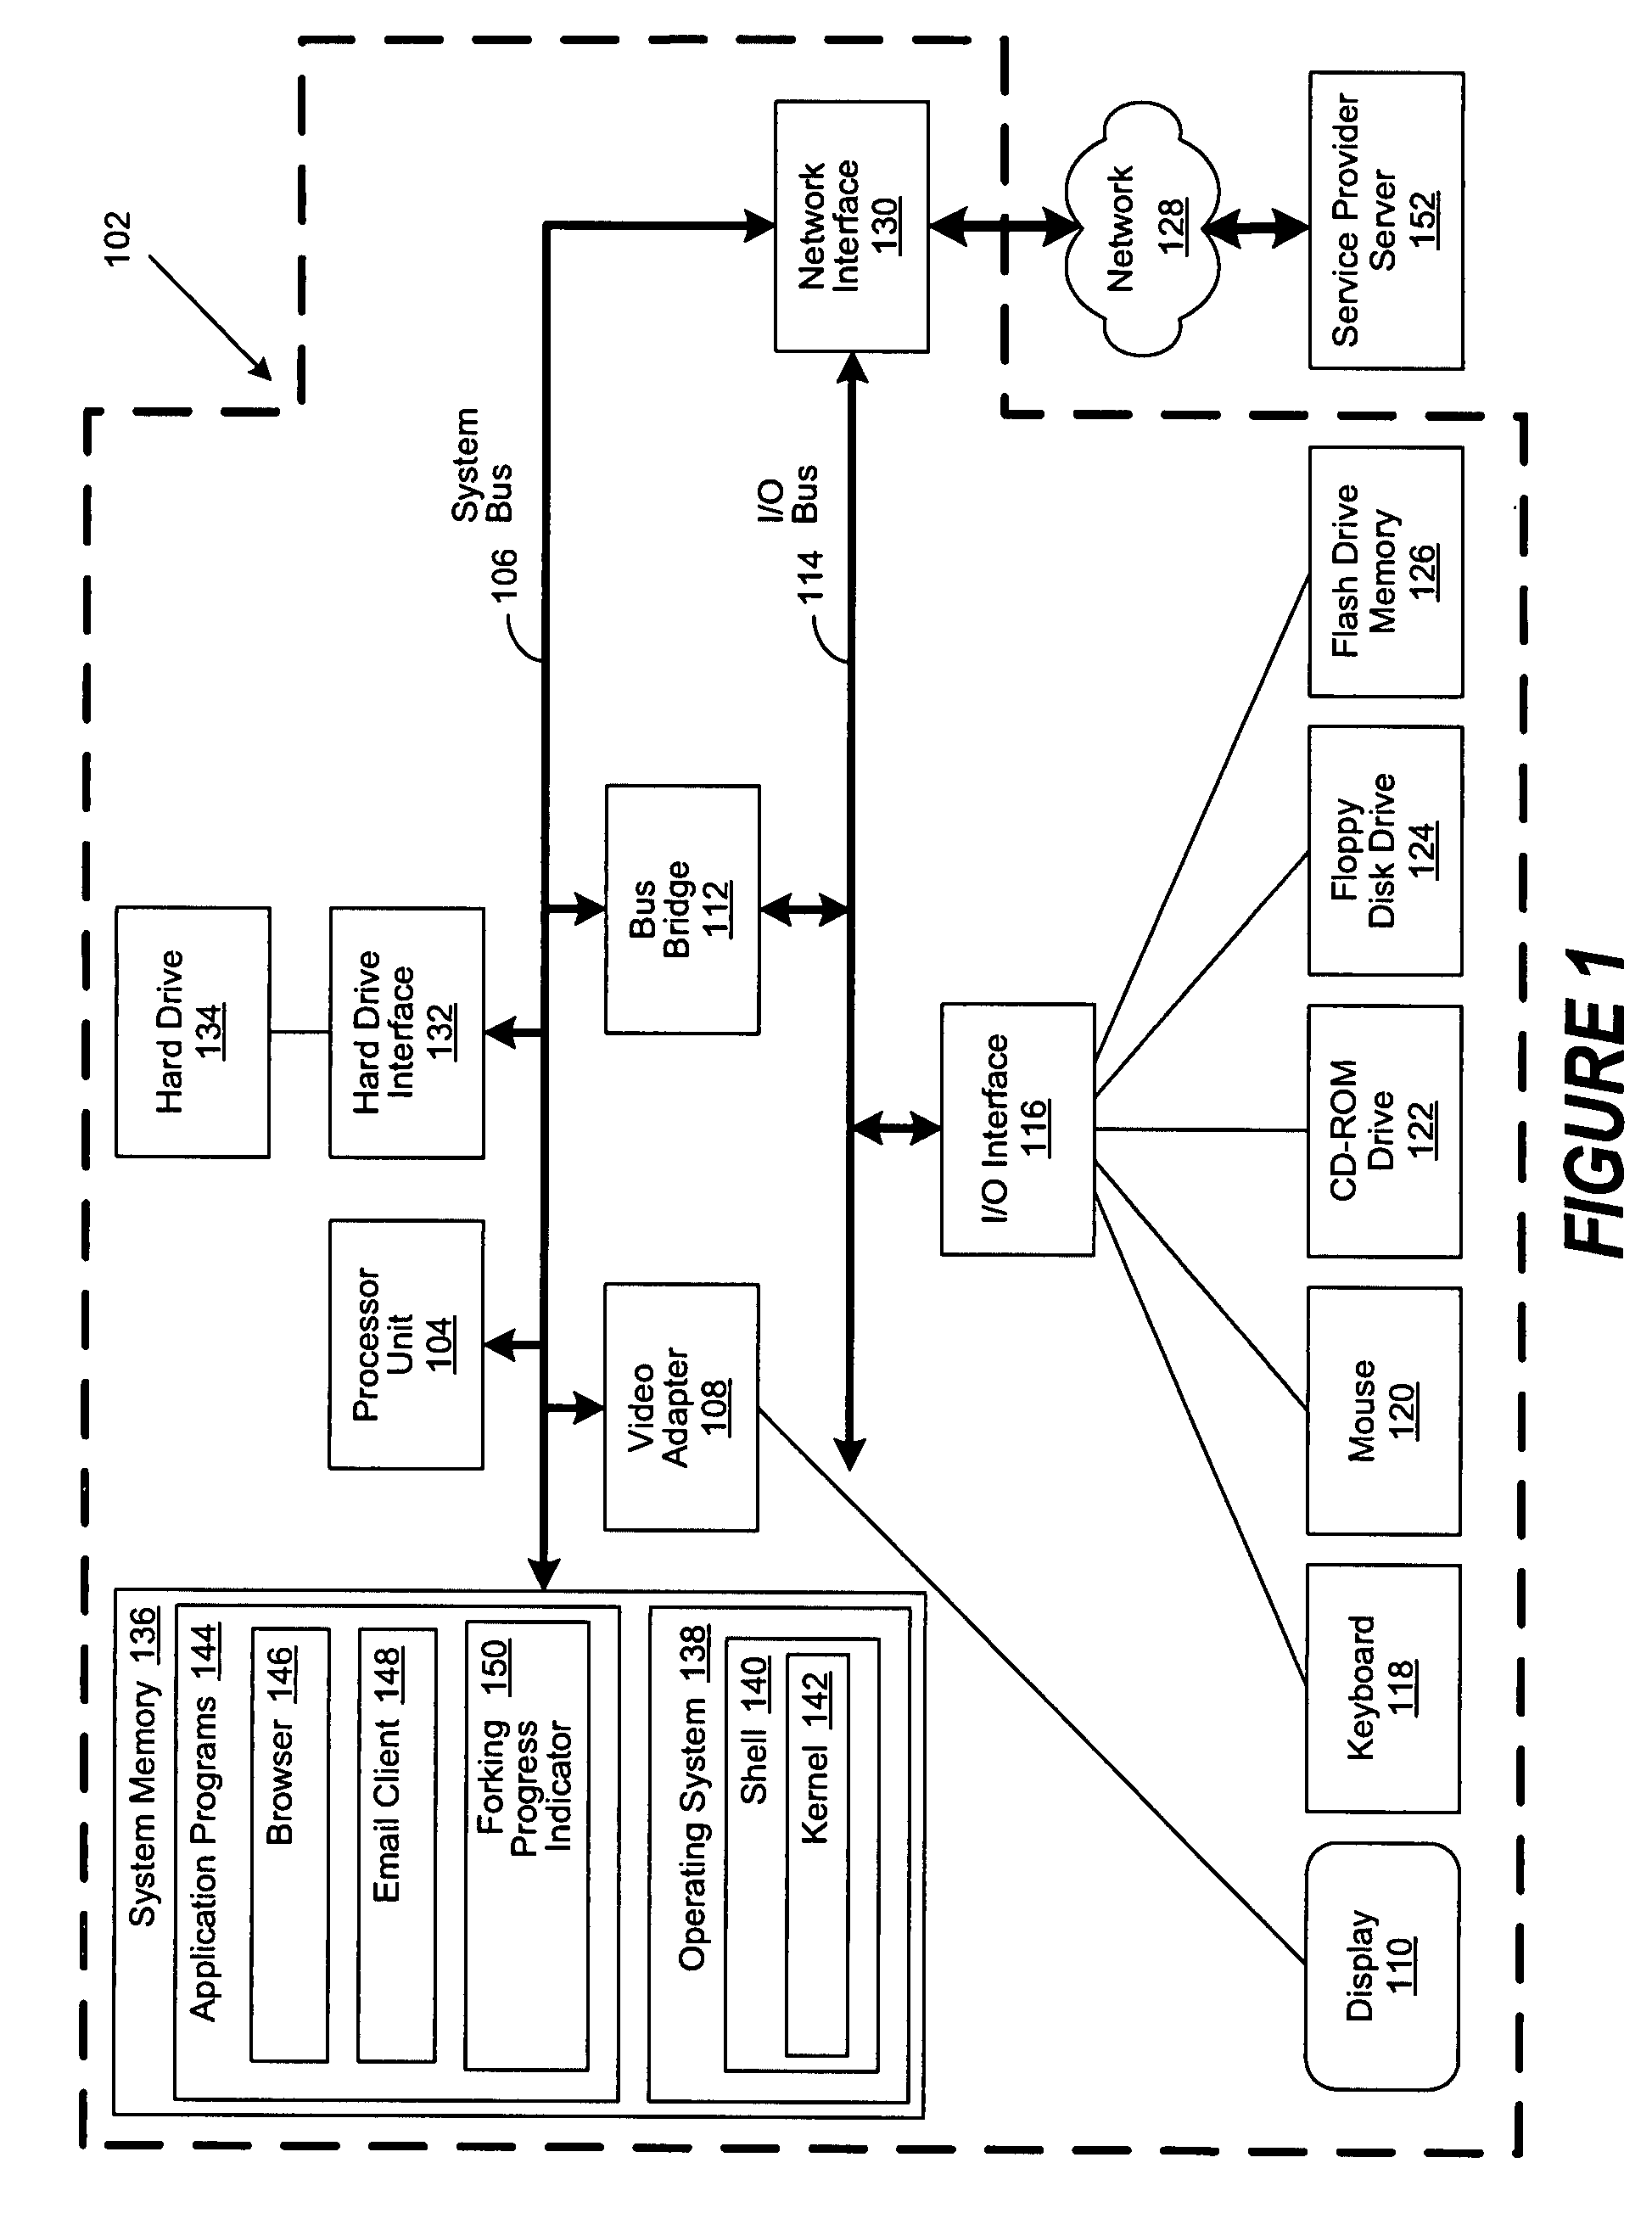 System and Method to Facilitate Progress Forking